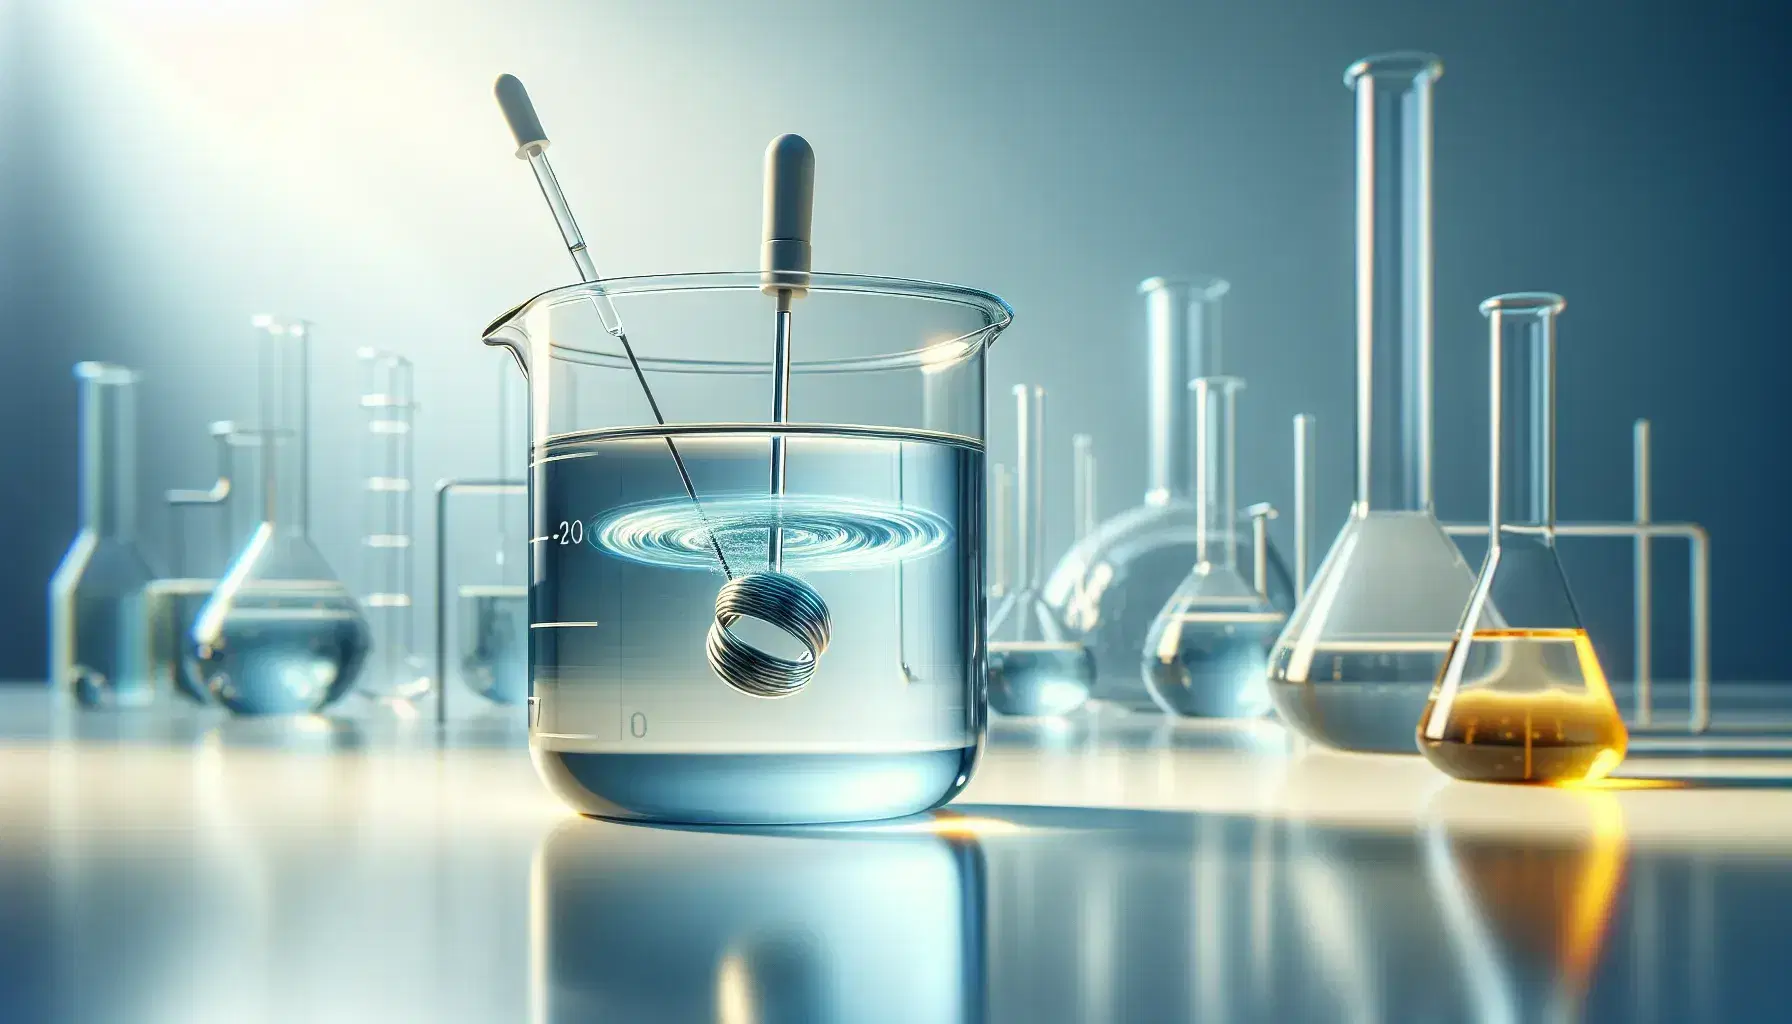 Glass beaker with light blue liquid and magnetic stirrer in action on laboratory bench, pipette with yellow liquid on the right, blurred background with glassware.